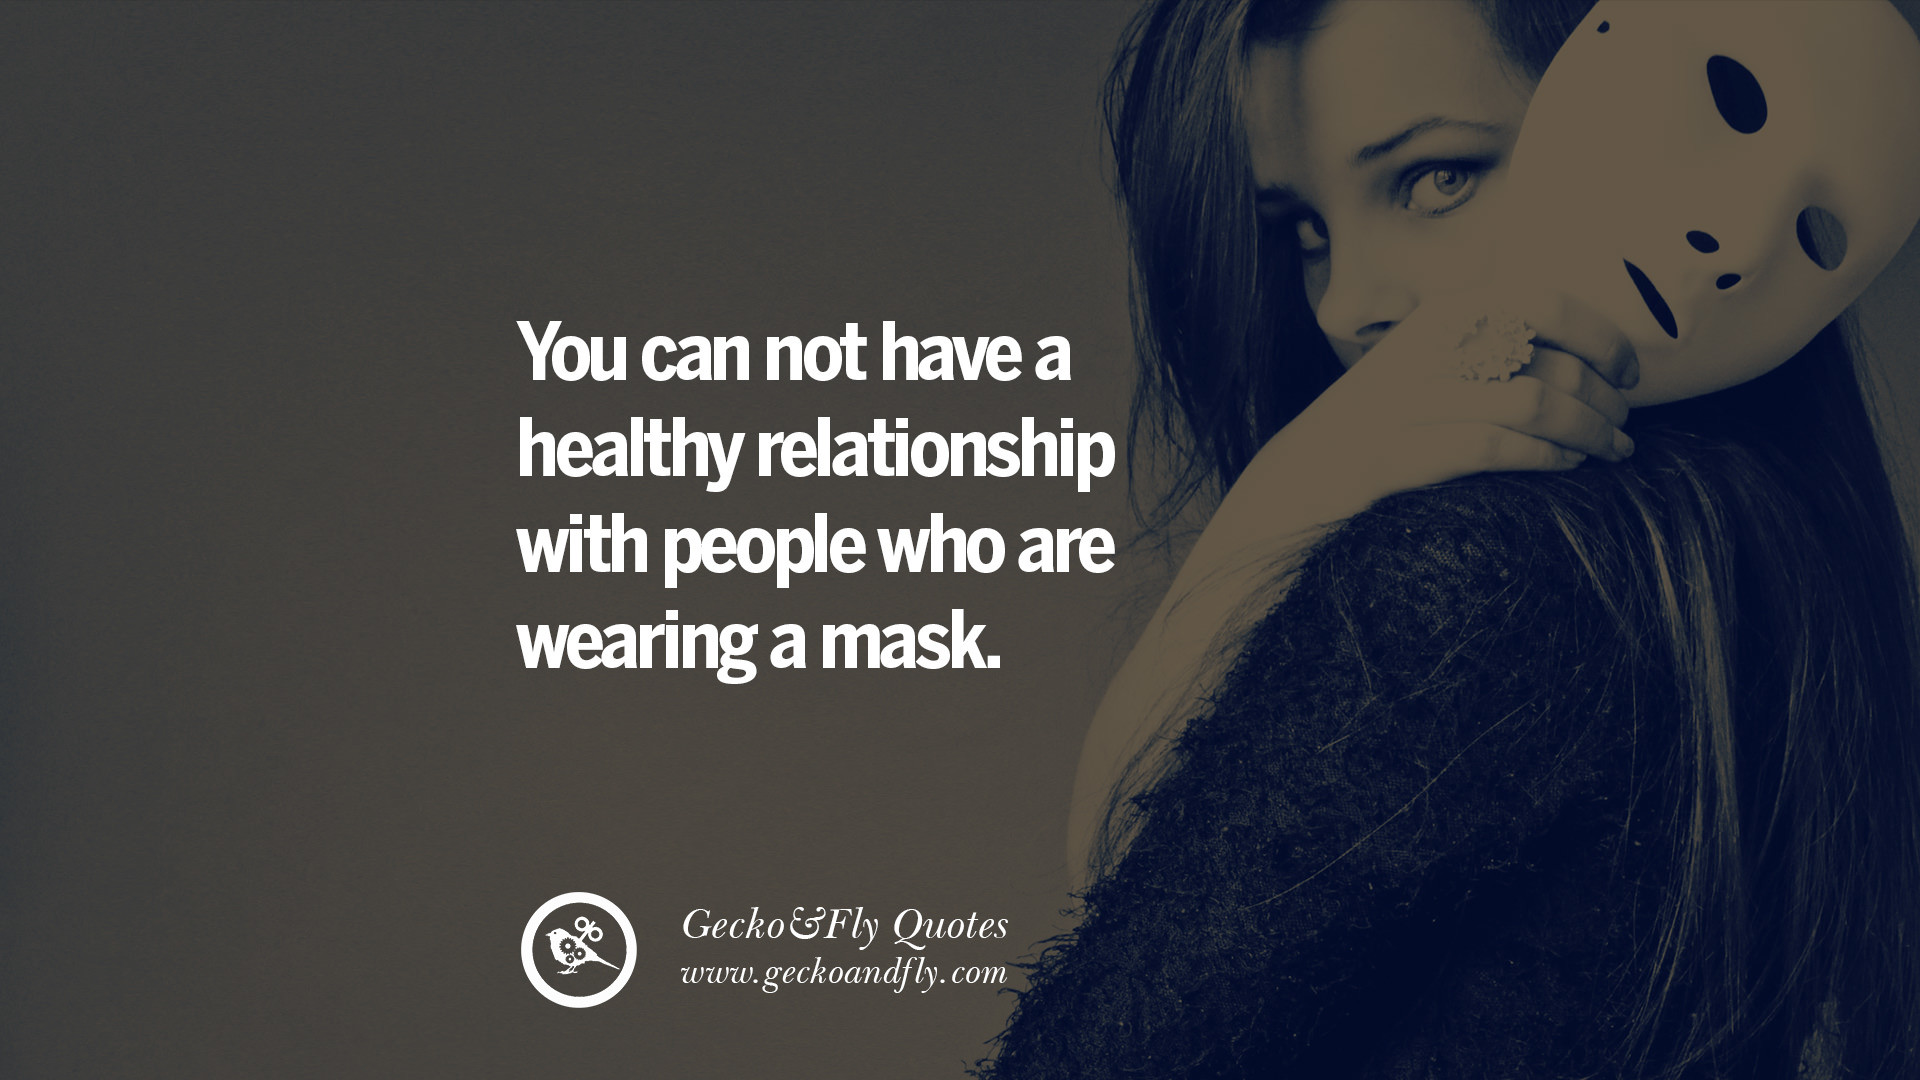 1920x1080 You can not have a healthy relationship with people who are wearing a mask.